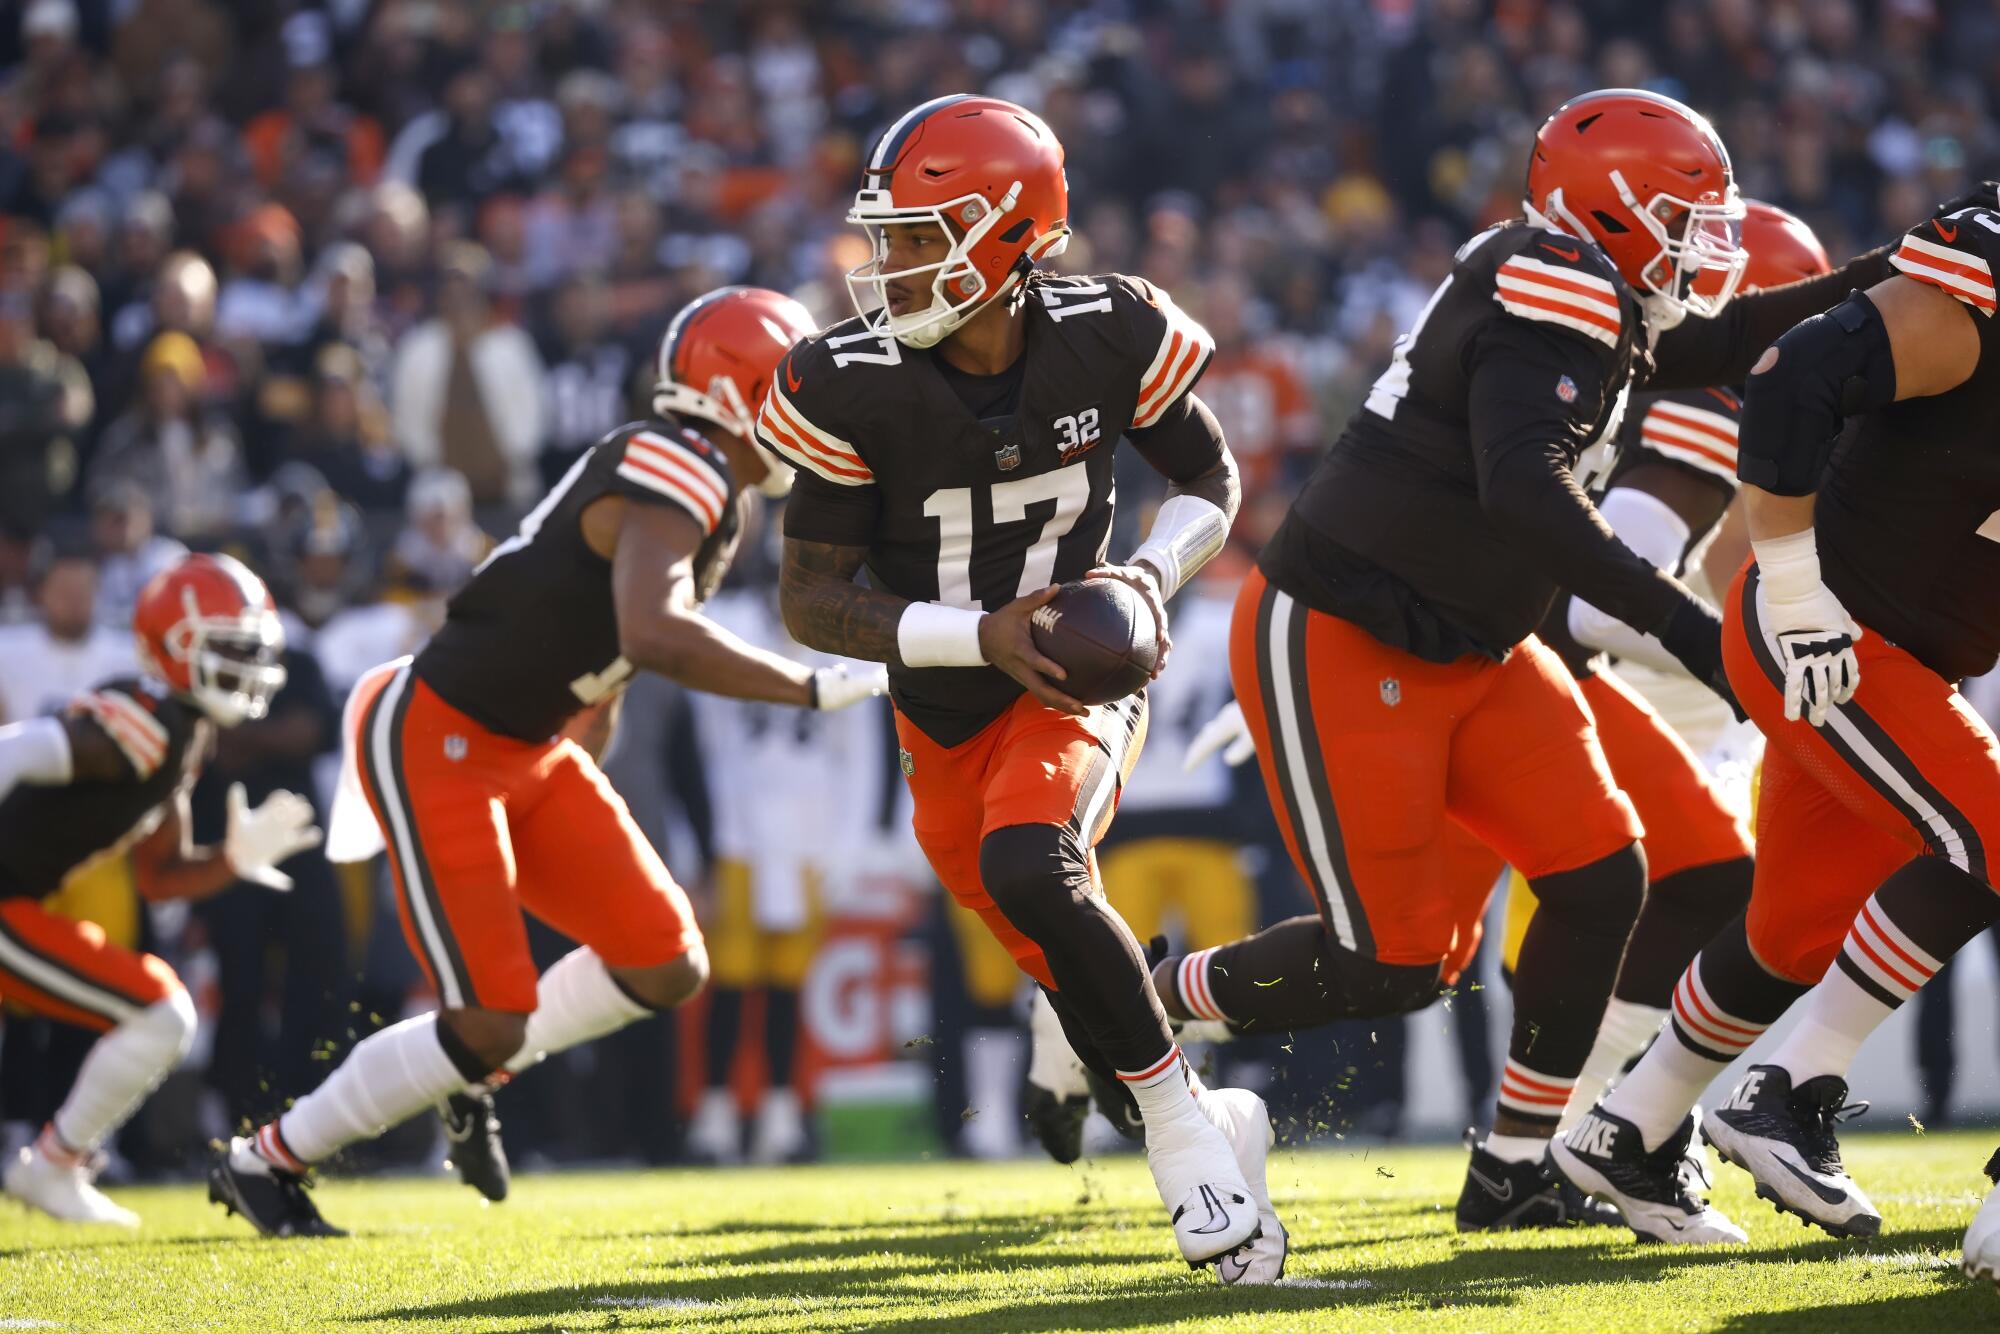 Browns quarterback Dorian Thompson-Robinson looks to hand off the ball during a game against the Steelers on Nov. 19.